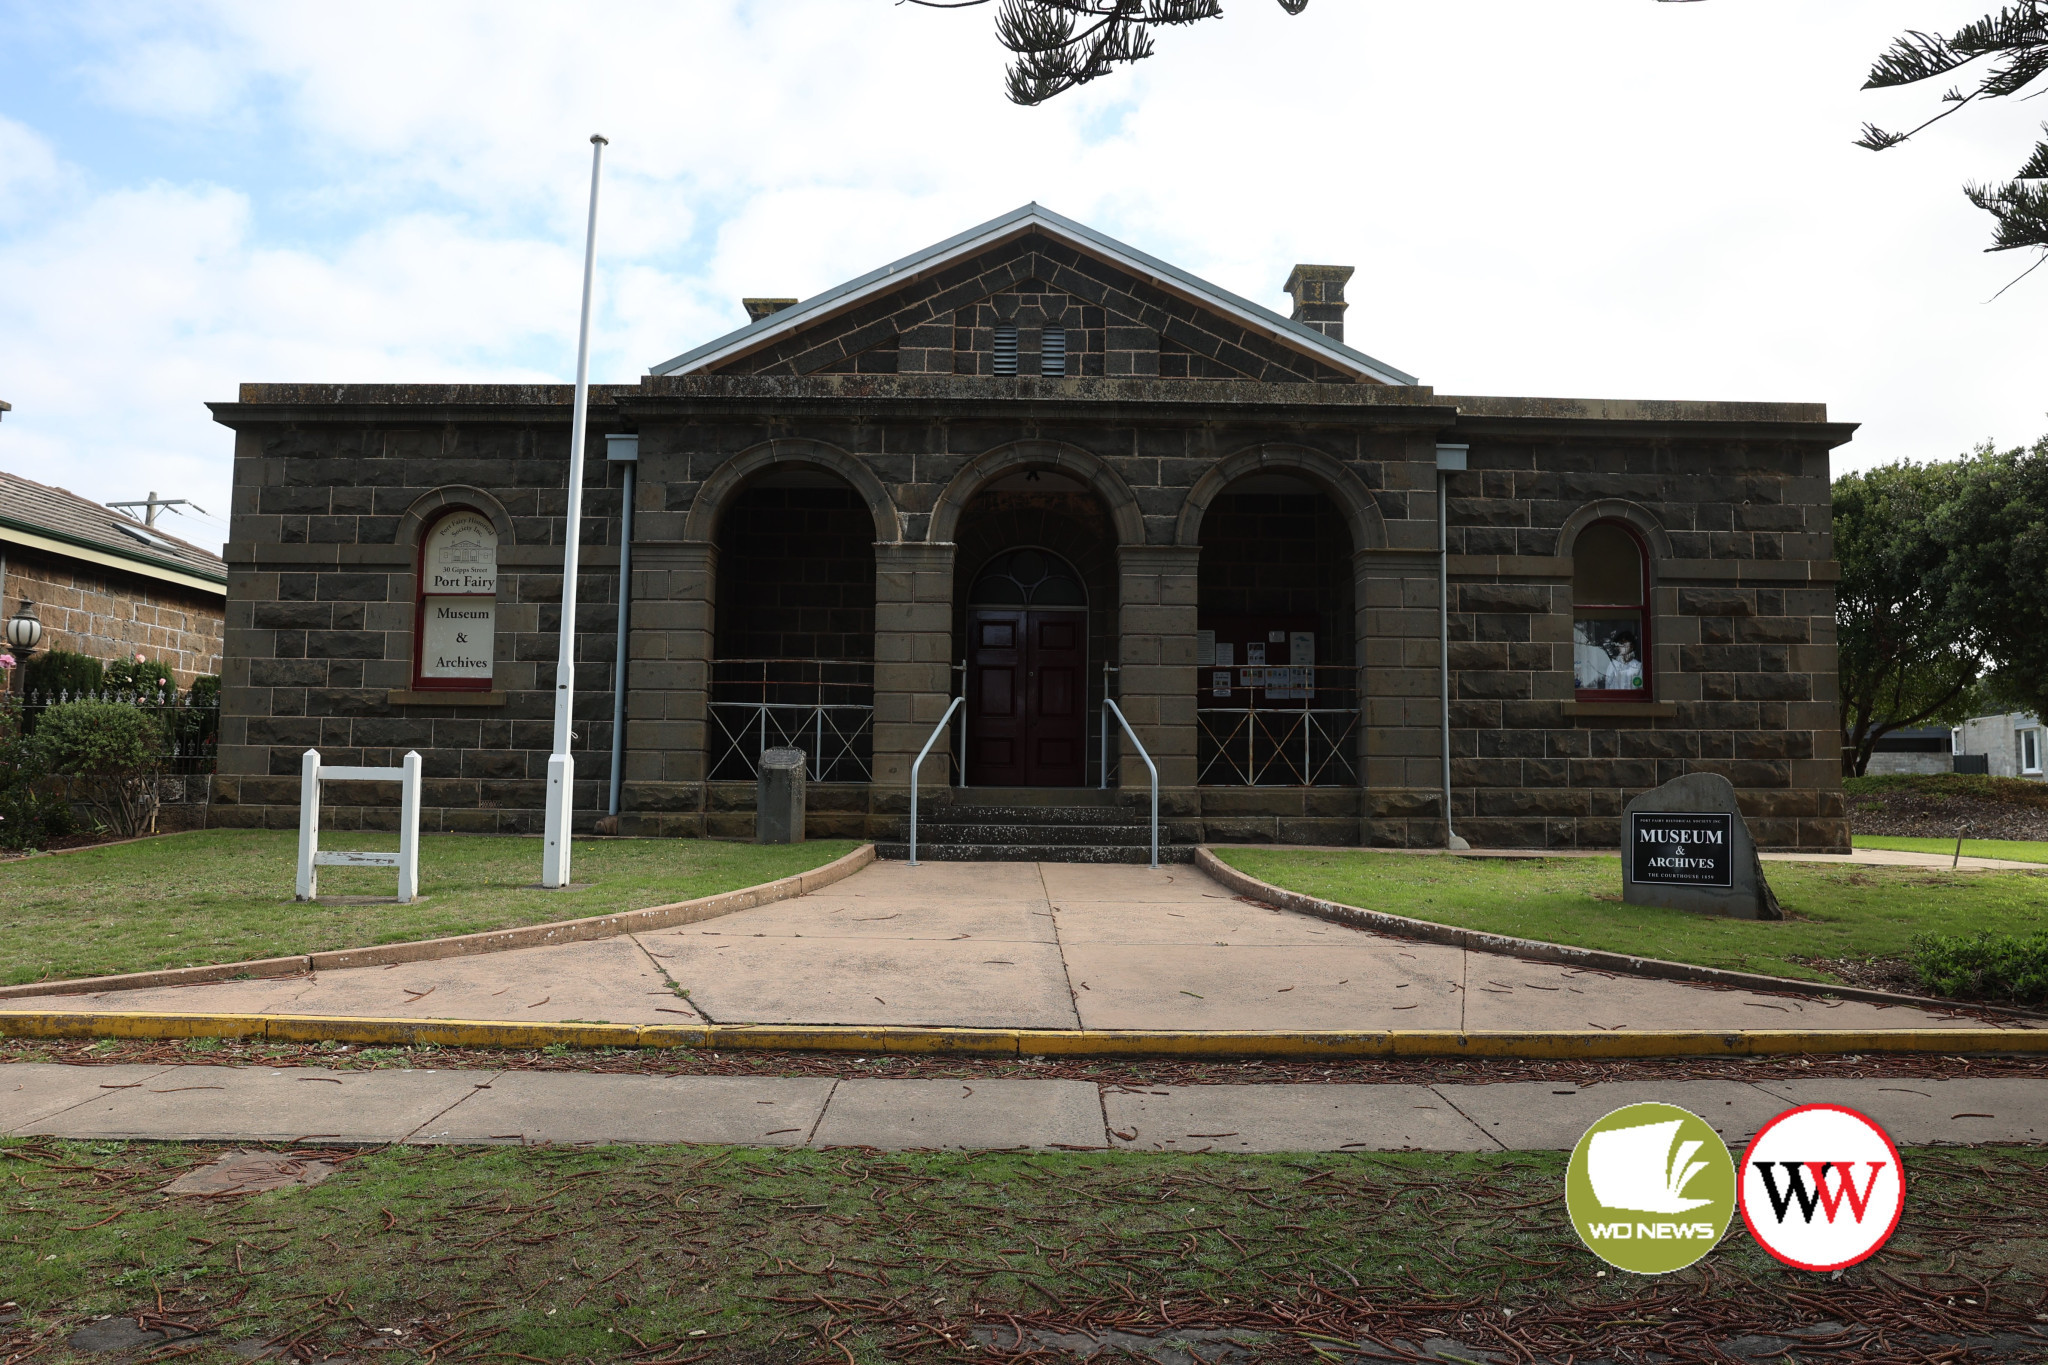 The former courthouse in Port Fairy will be open to the public over the weekend of May 25 and 26.